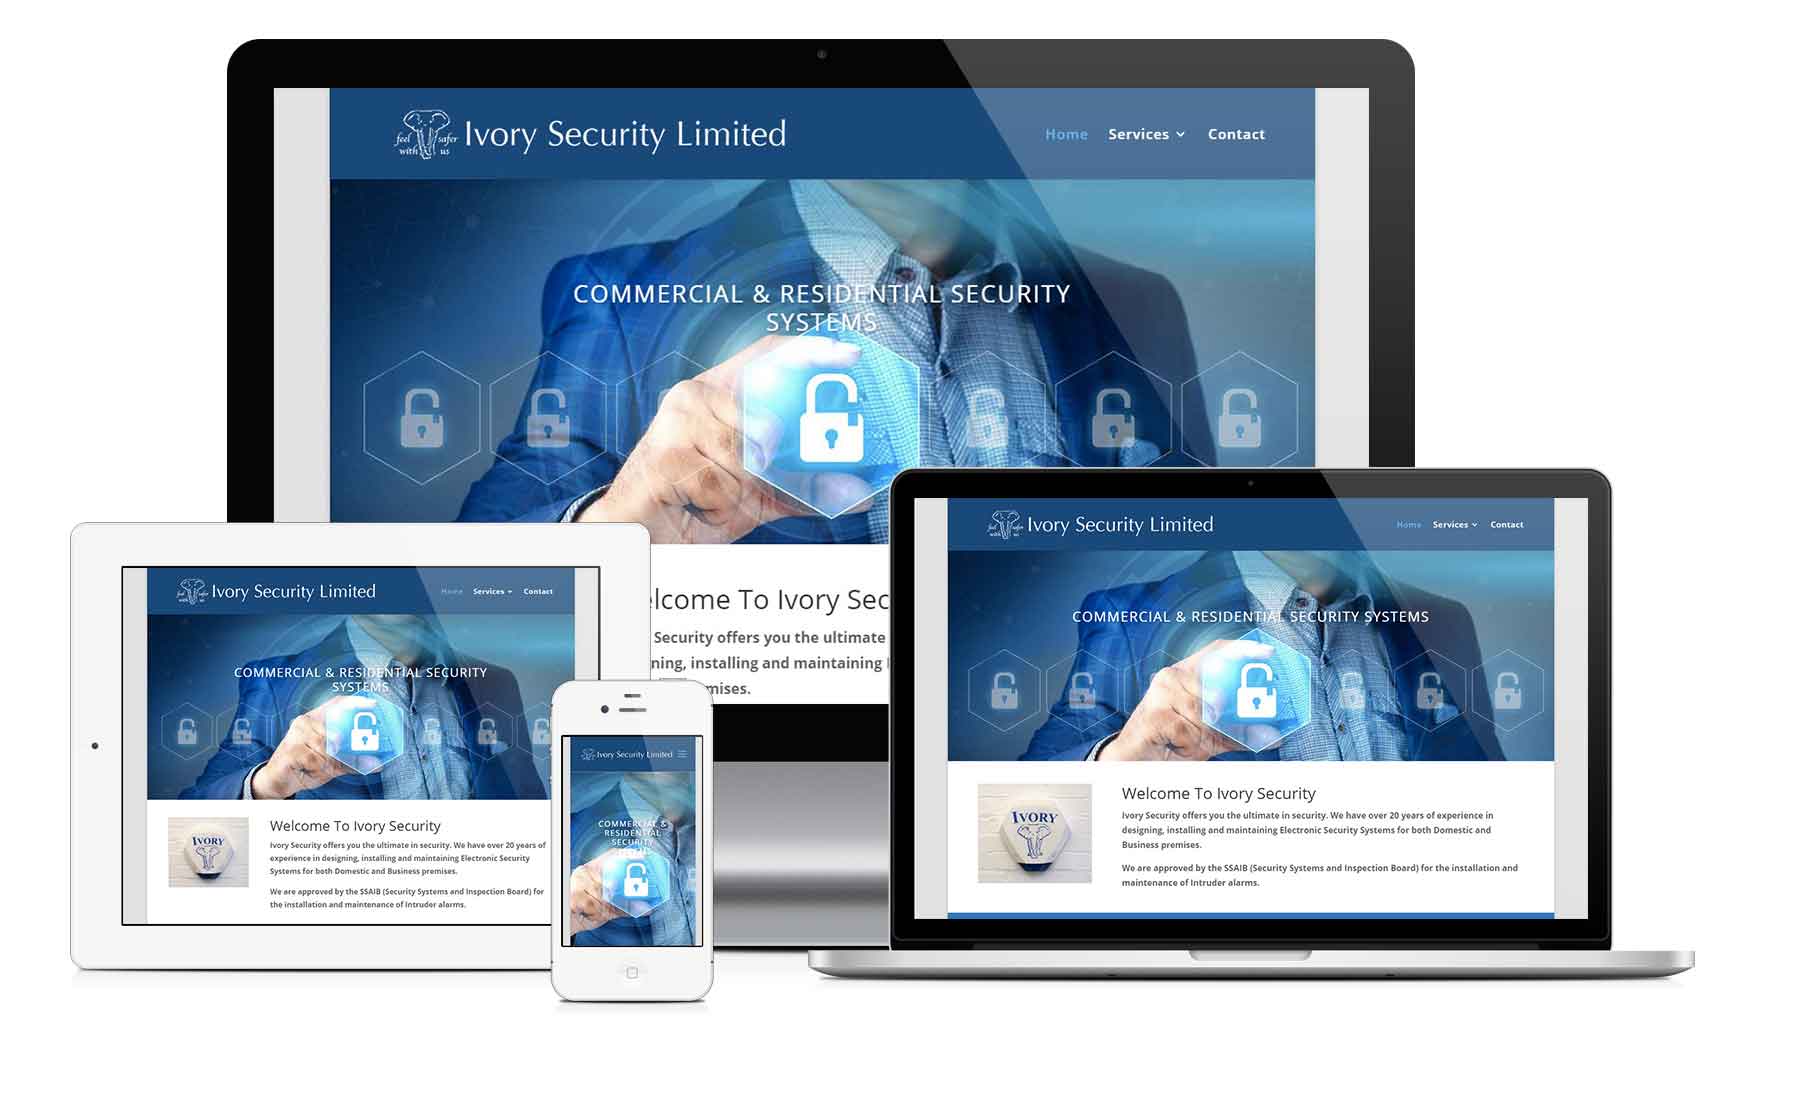 image of the website ivorysecurity.co.uk as seen on different devices